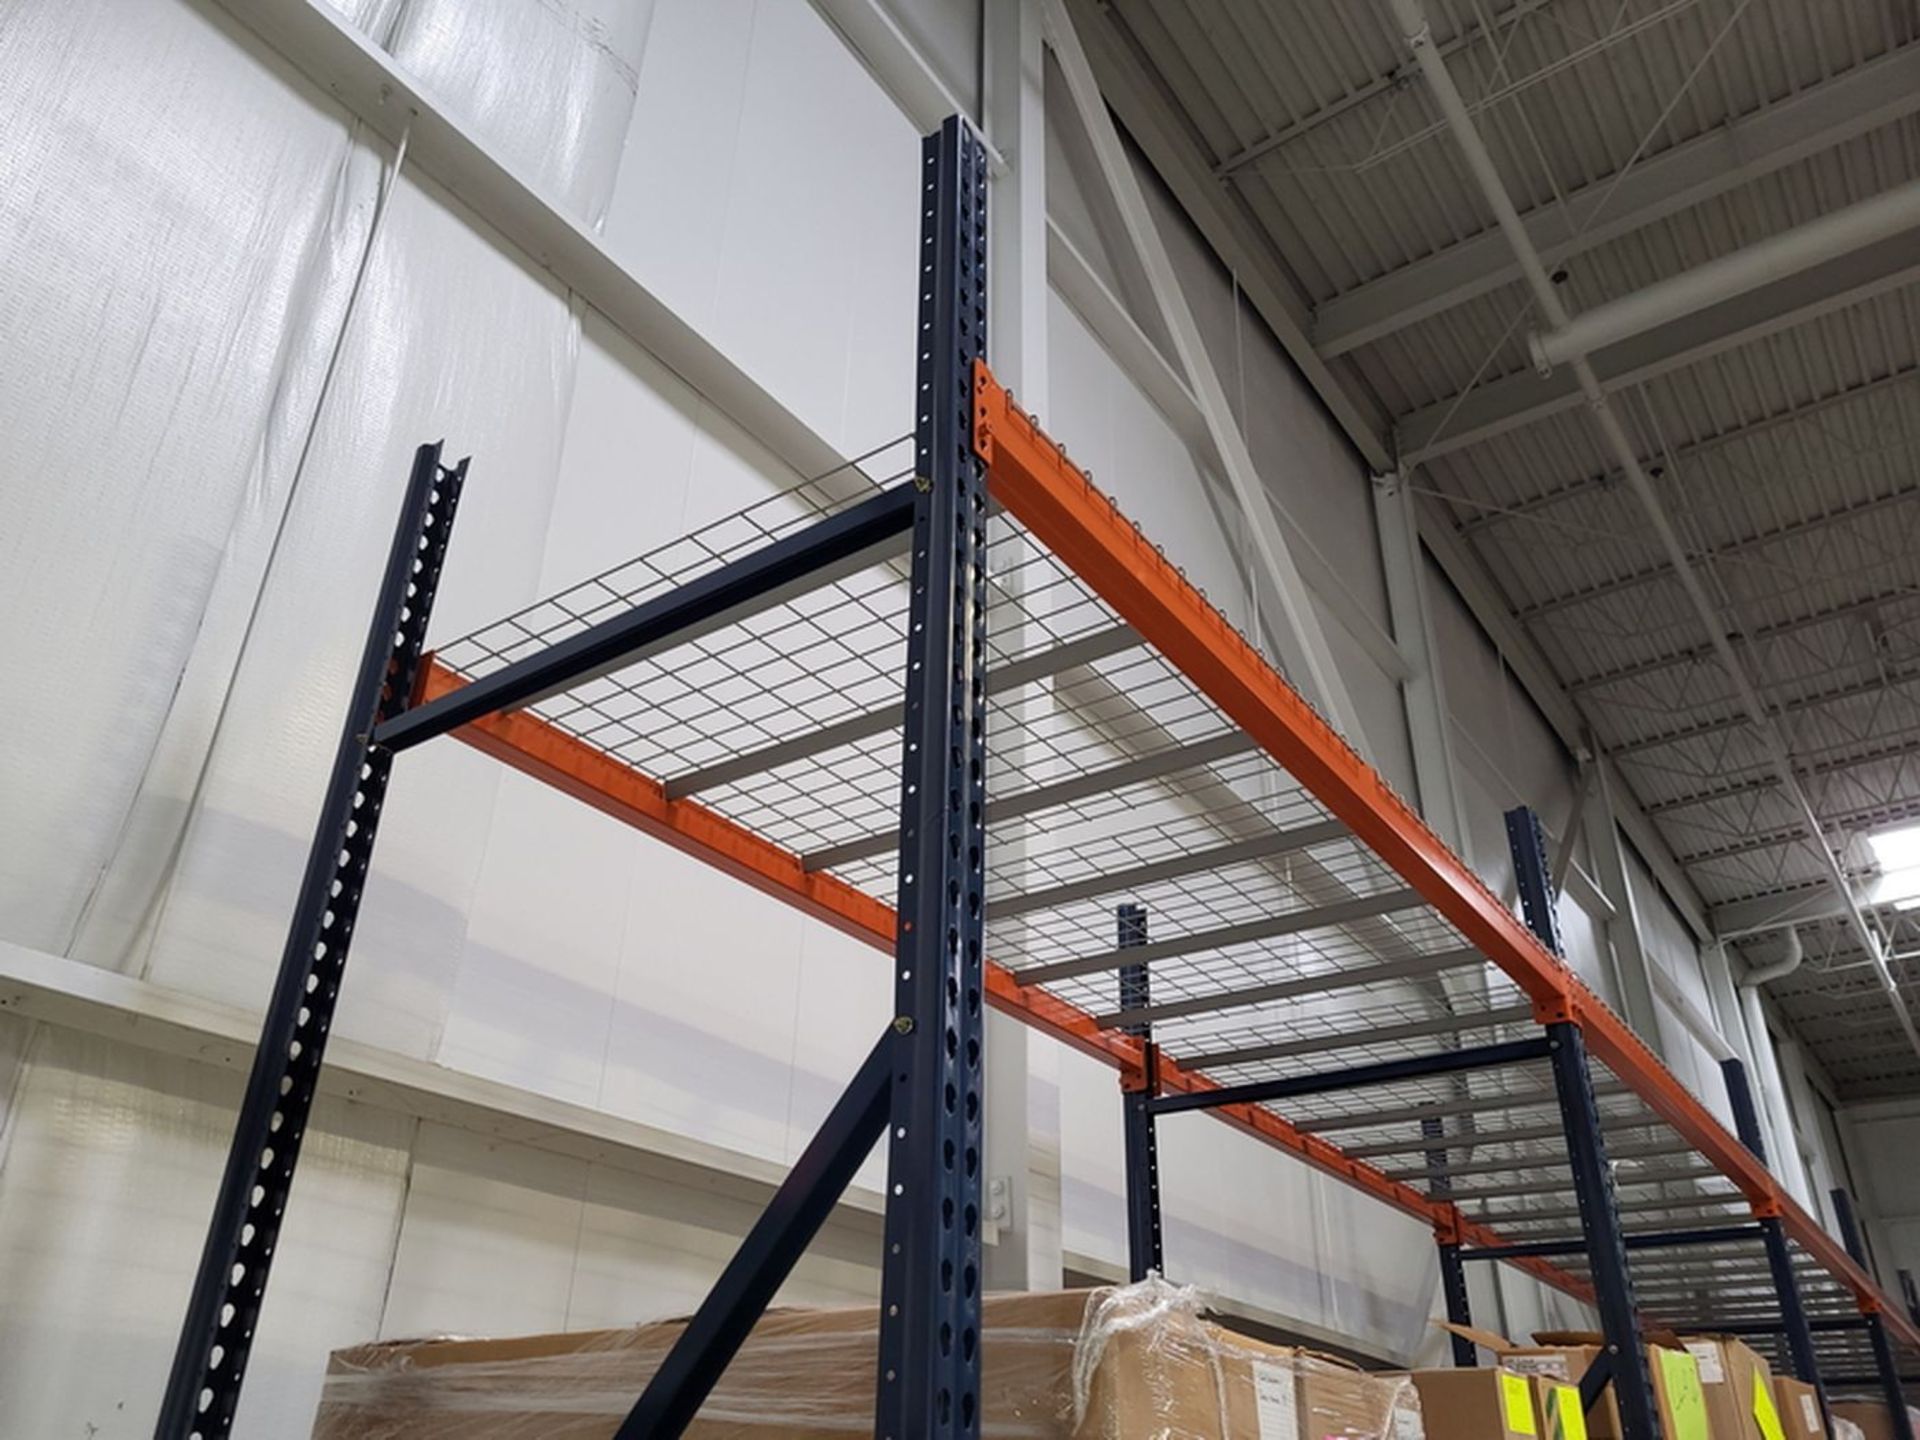 Lot - (10) Sections of Interlake Medium Duty Adjustable Pallet Racking; 8 ft. wide x 48 in. deep x - Image 2 of 2